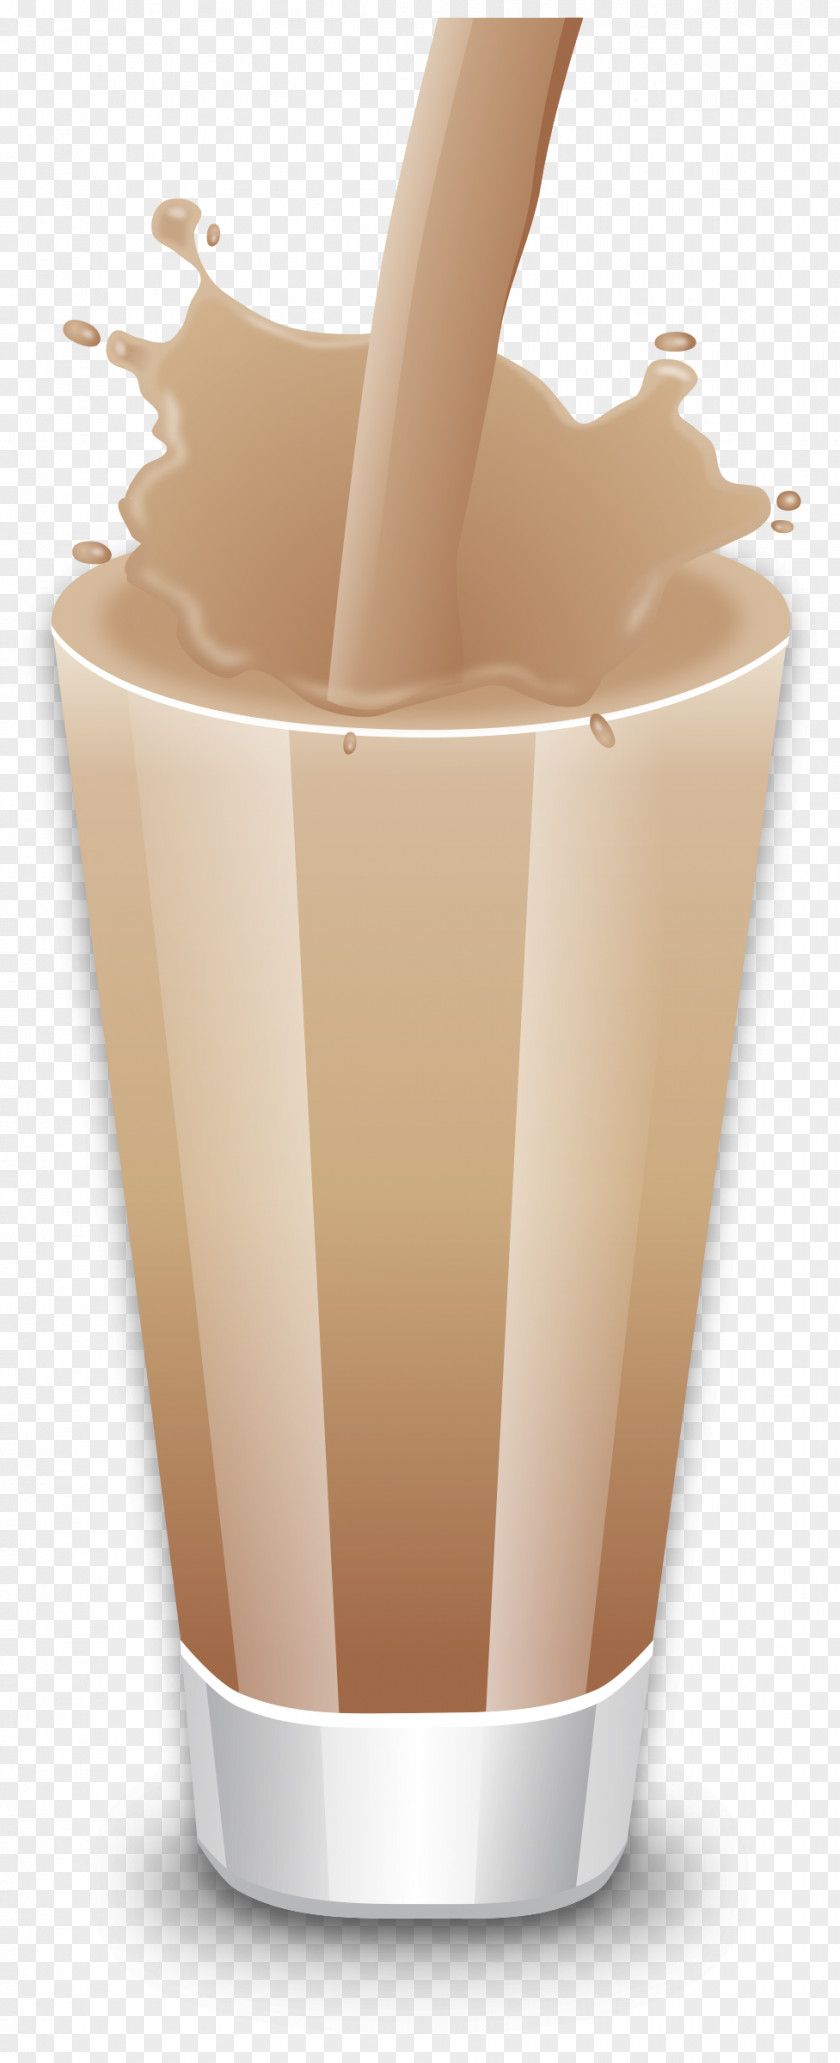 Coco Drink Cocoa Bean Clip Art PNG